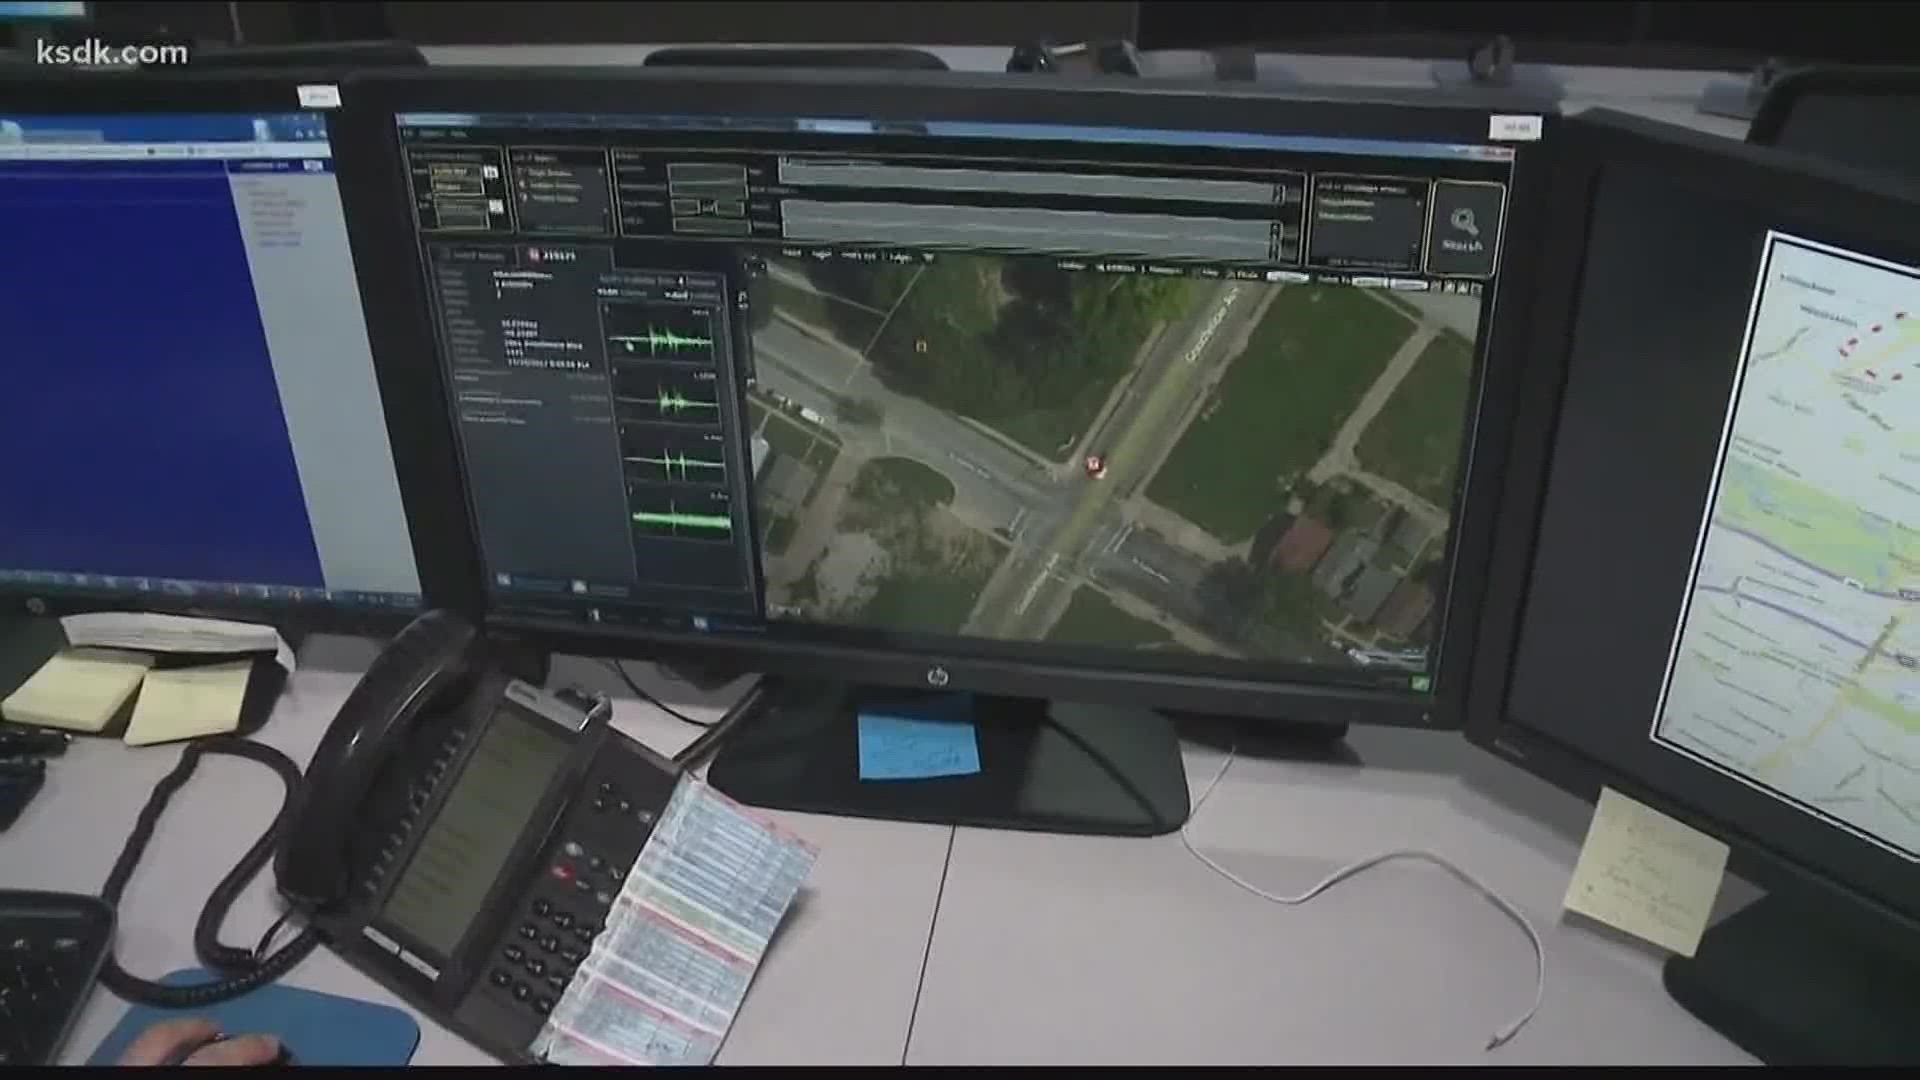 The department says the gunshot detection system didn't fit with its budget.